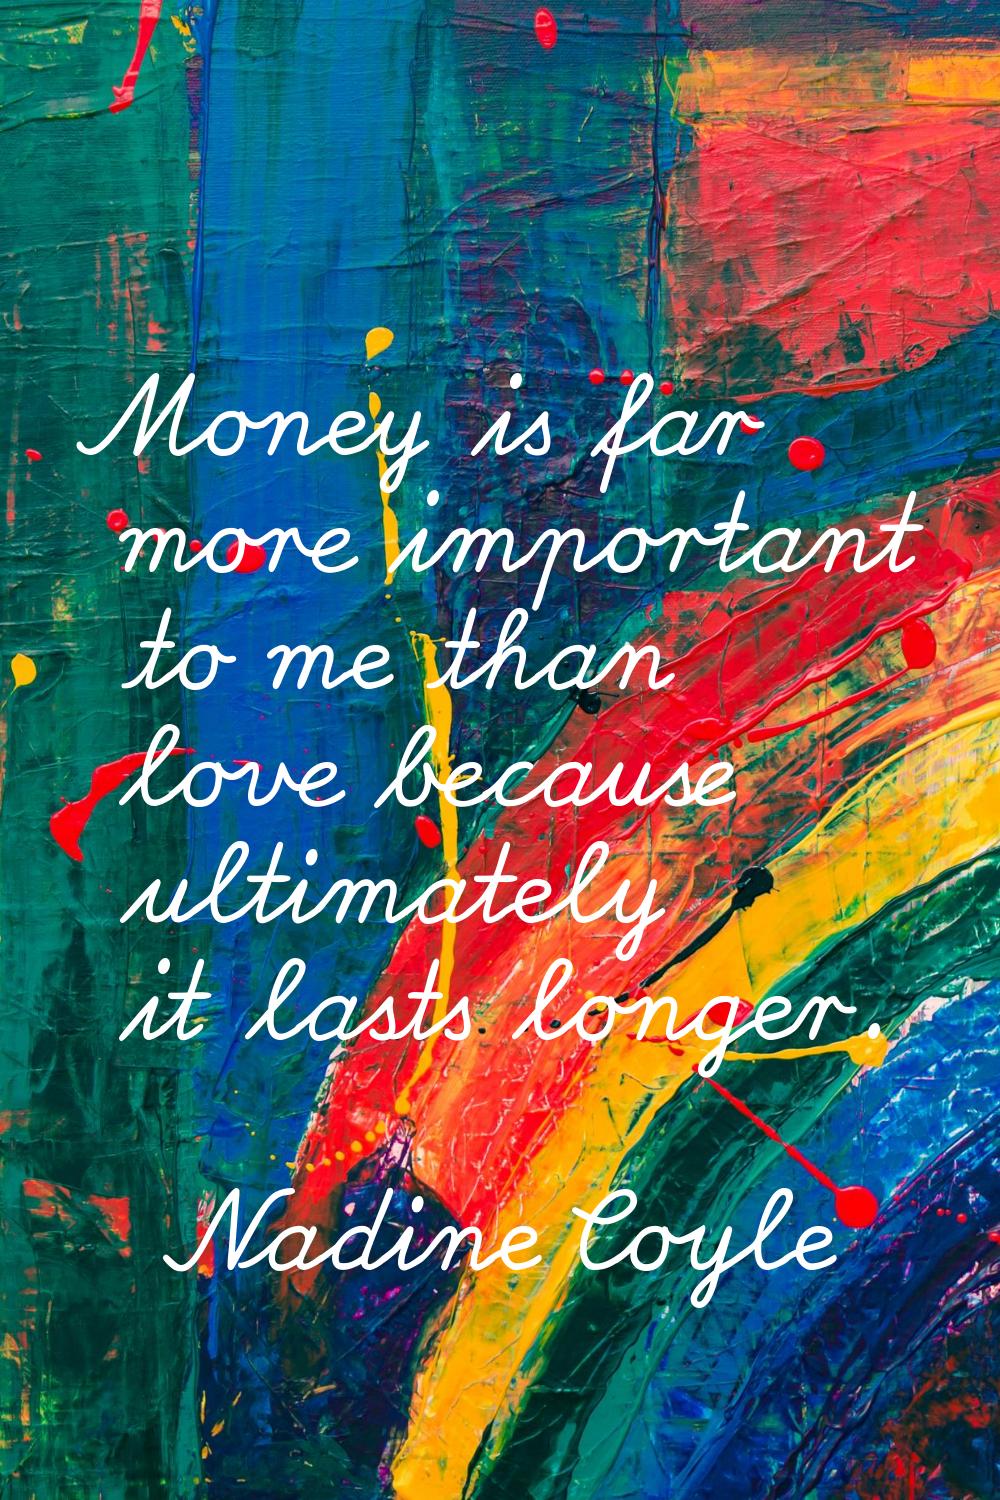 Money is far more important to me than love because ultimately it lasts longer.